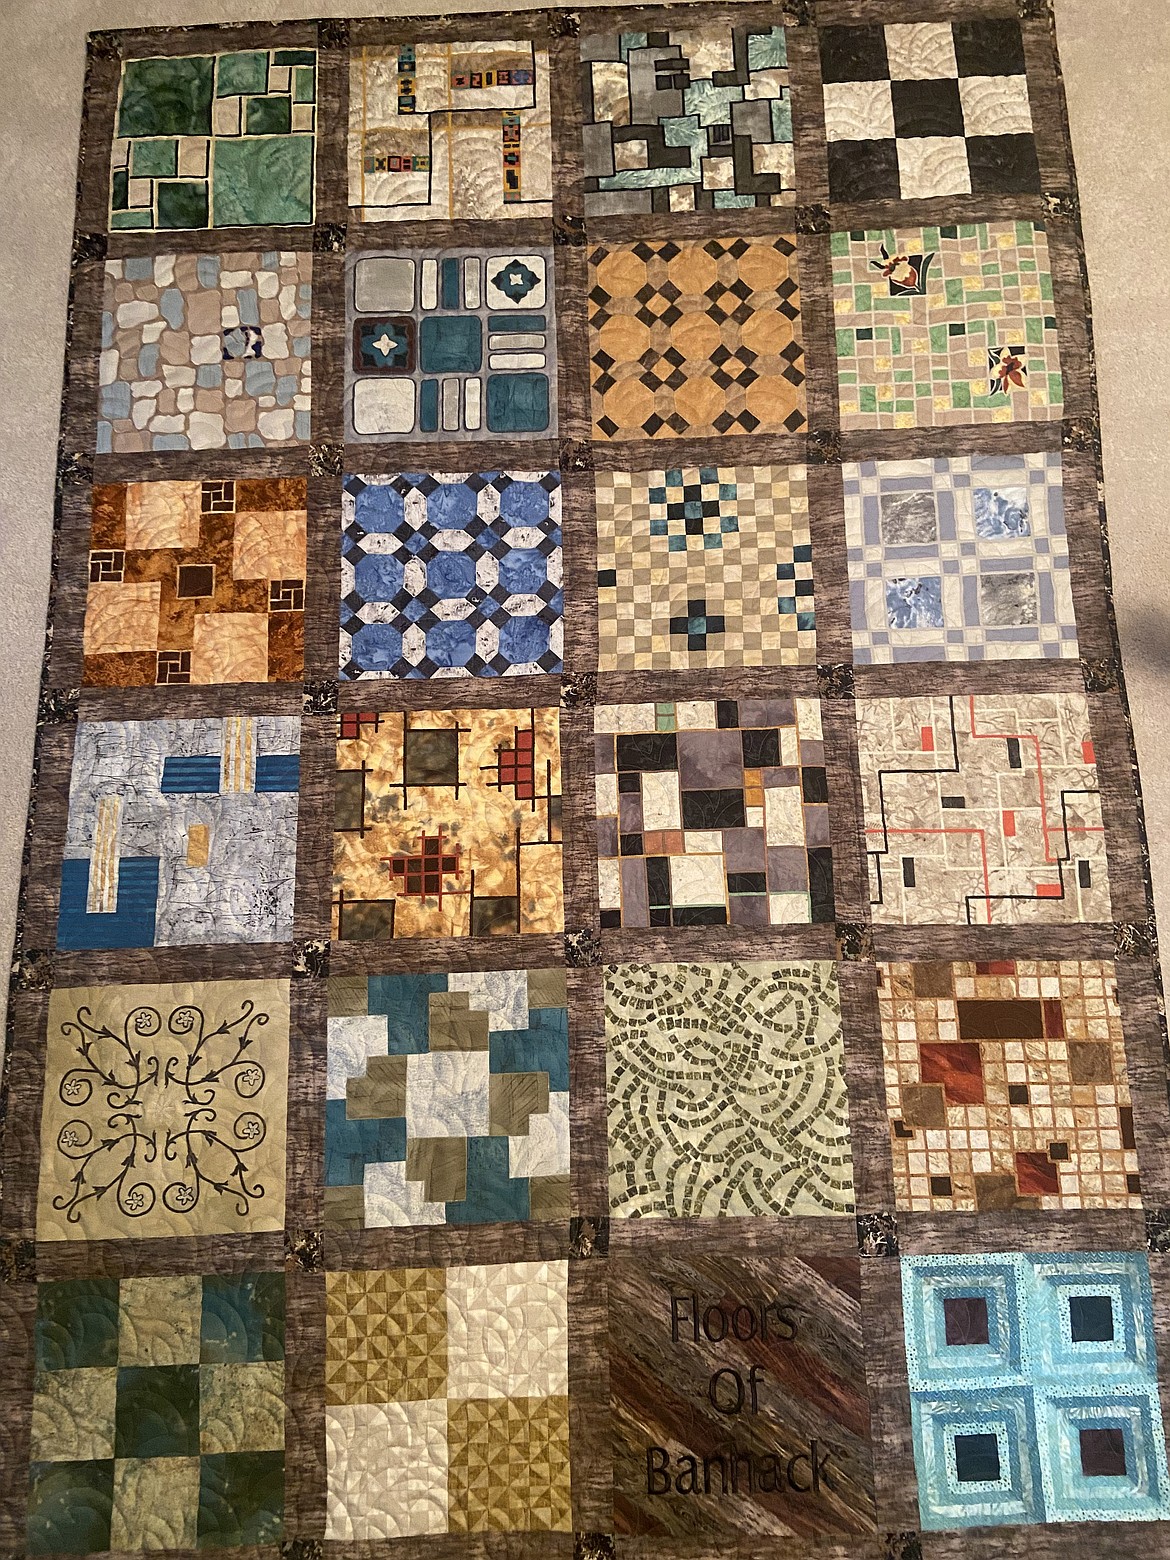 Lanette Cuffe's "Floors of Bannack" quilt was inspired by the linoleum flooring patterns in the buildings of the ghost town of Bannack near Dillon.